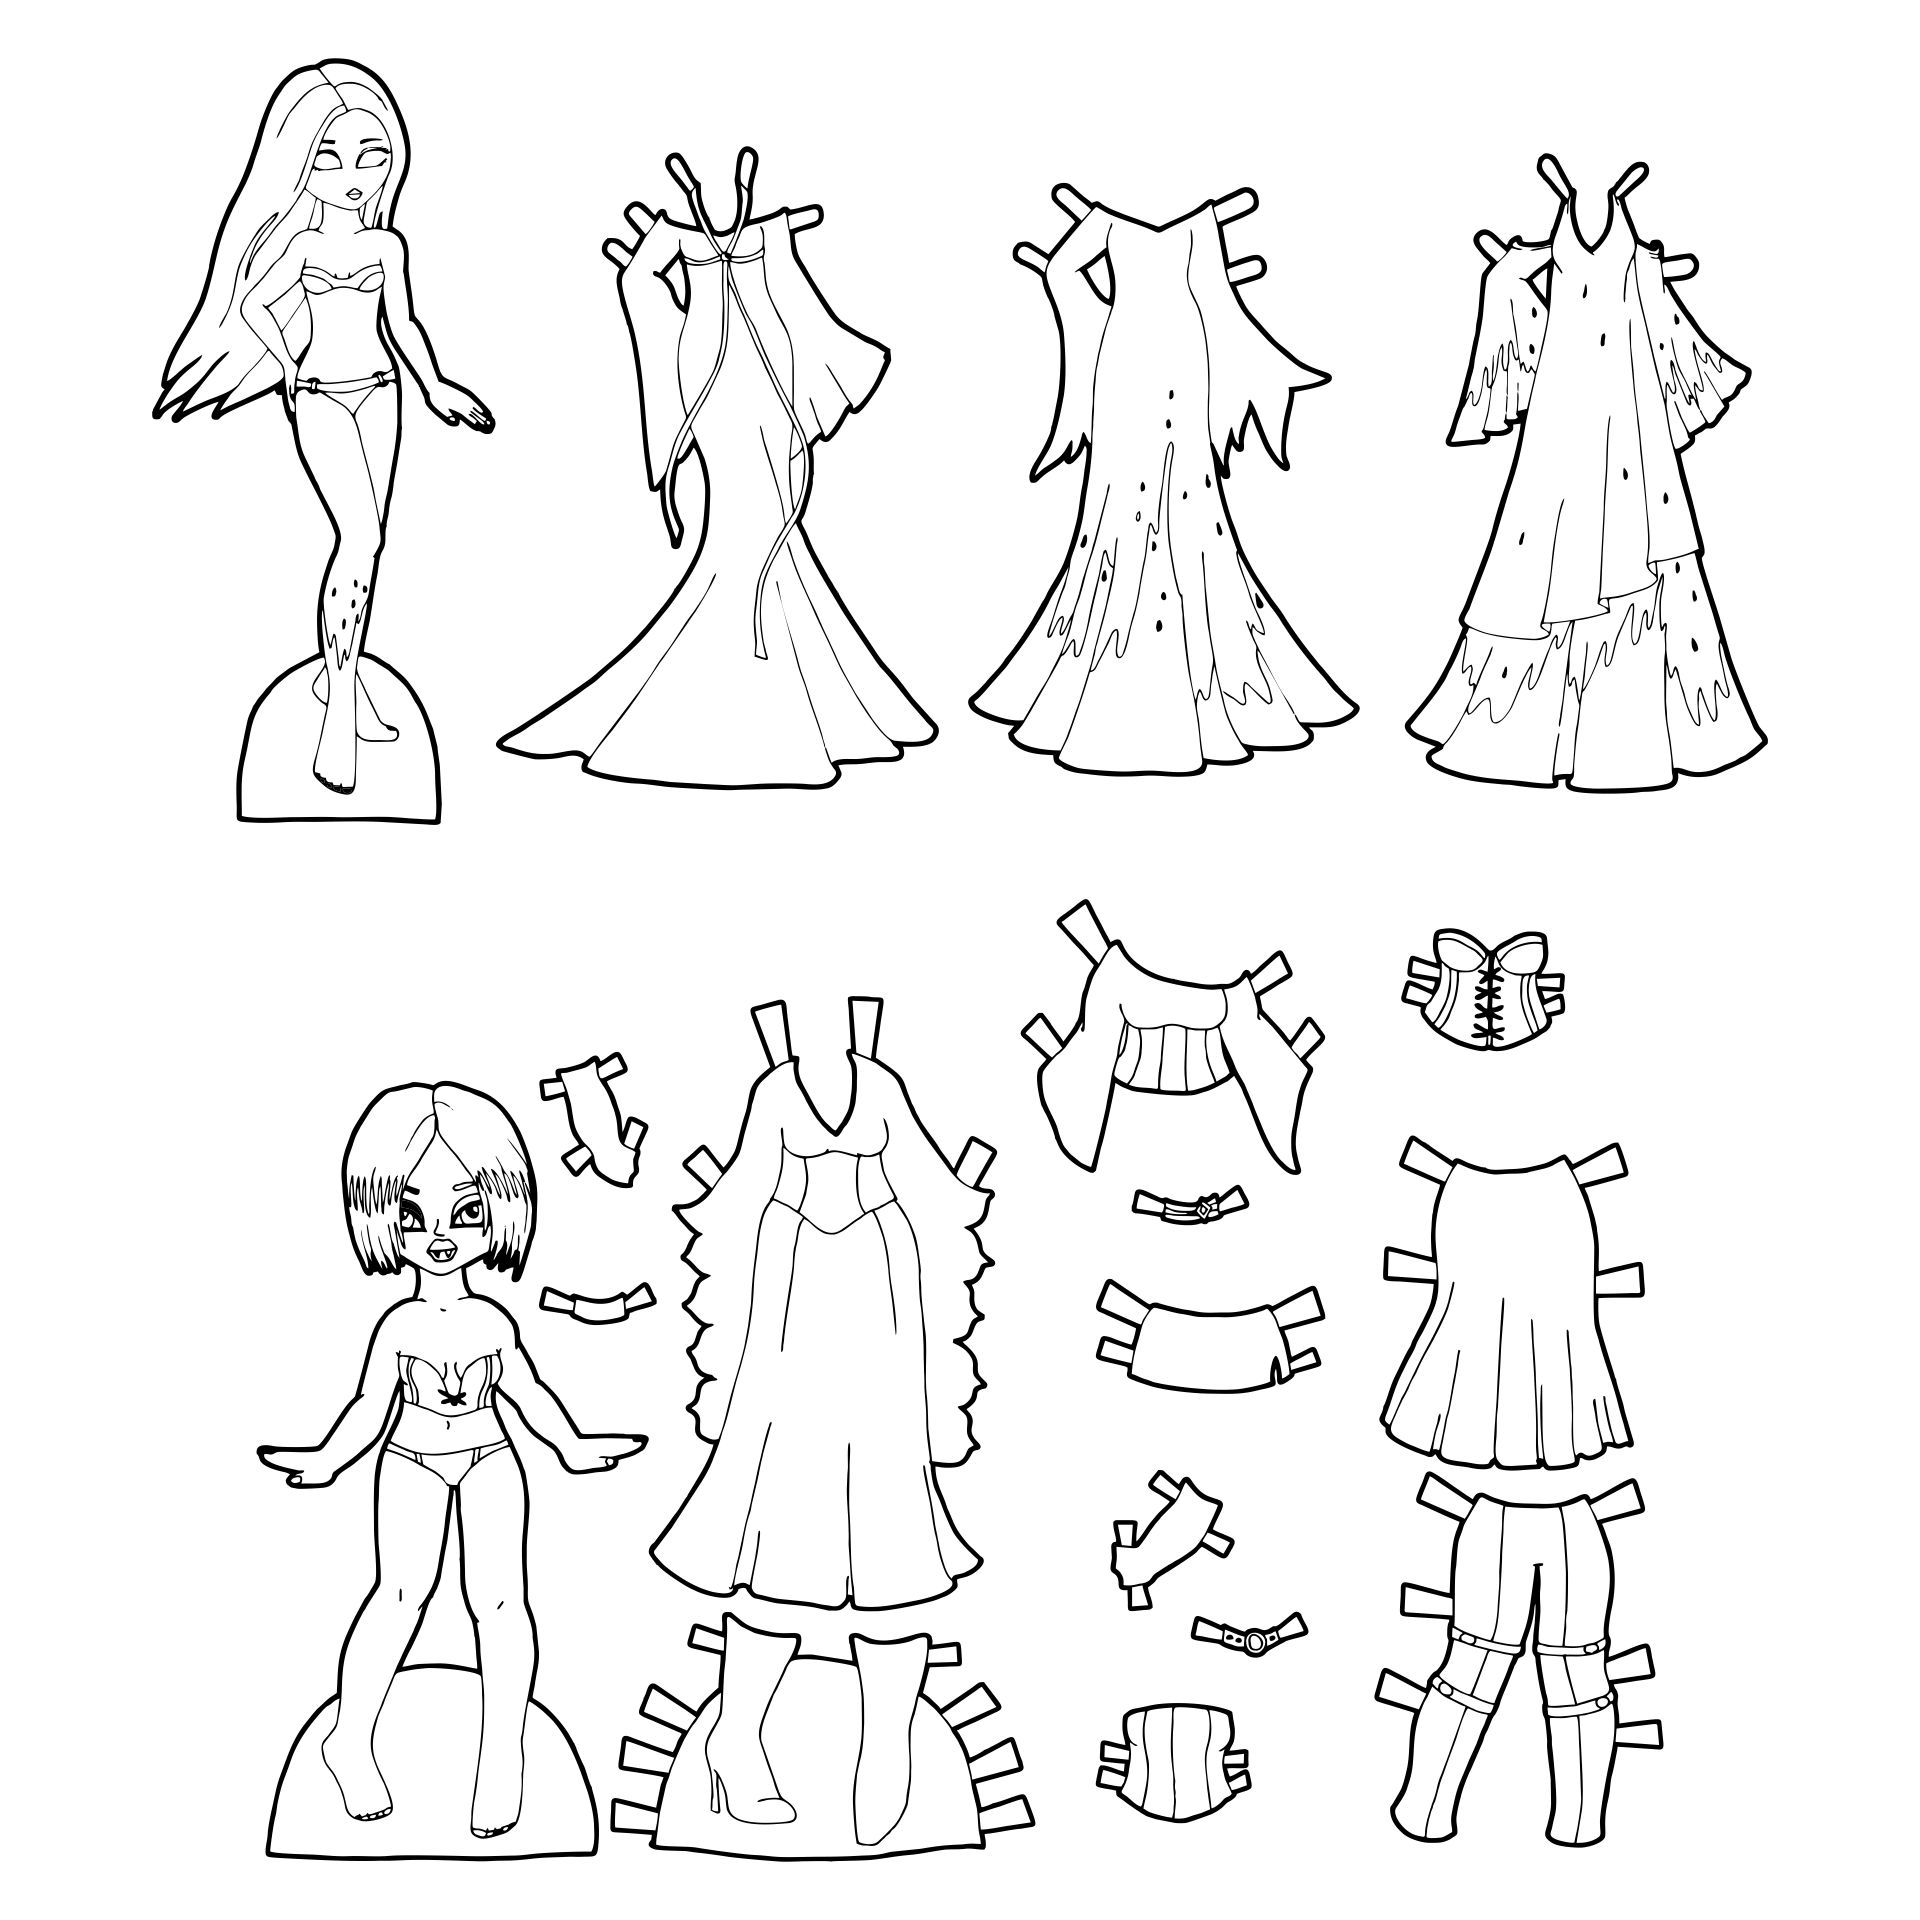 Halloween Paper Doll With Different Costumes